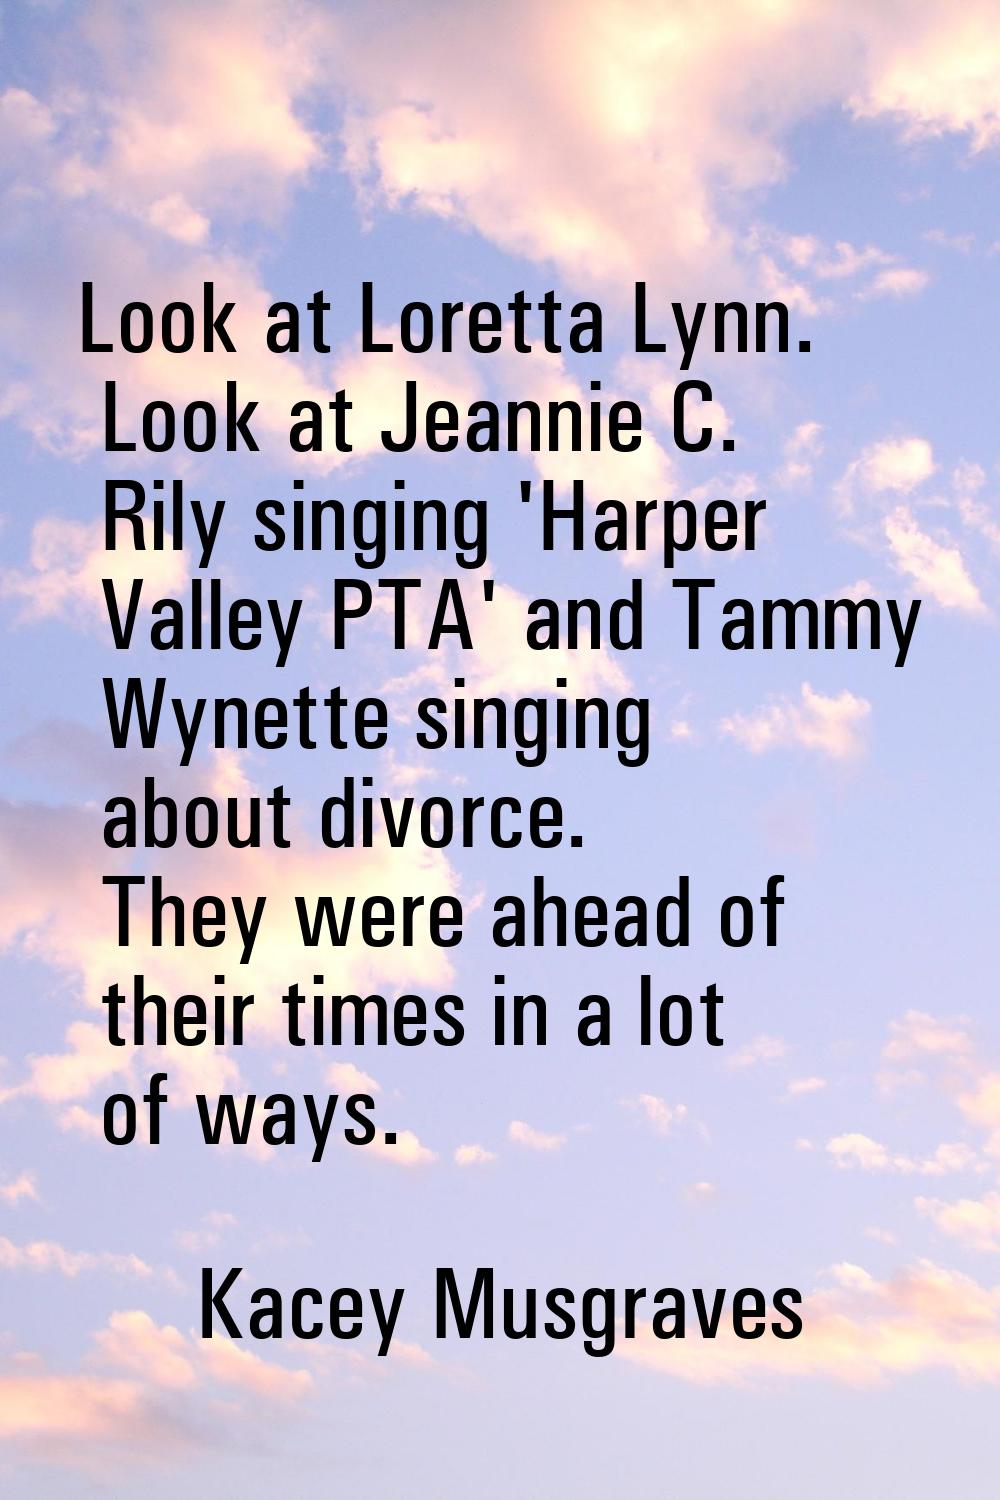 Look at Loretta Lynn. Look at Jeannie C. Rily singing 'Harper Valley PTA' and Tammy Wynette singing